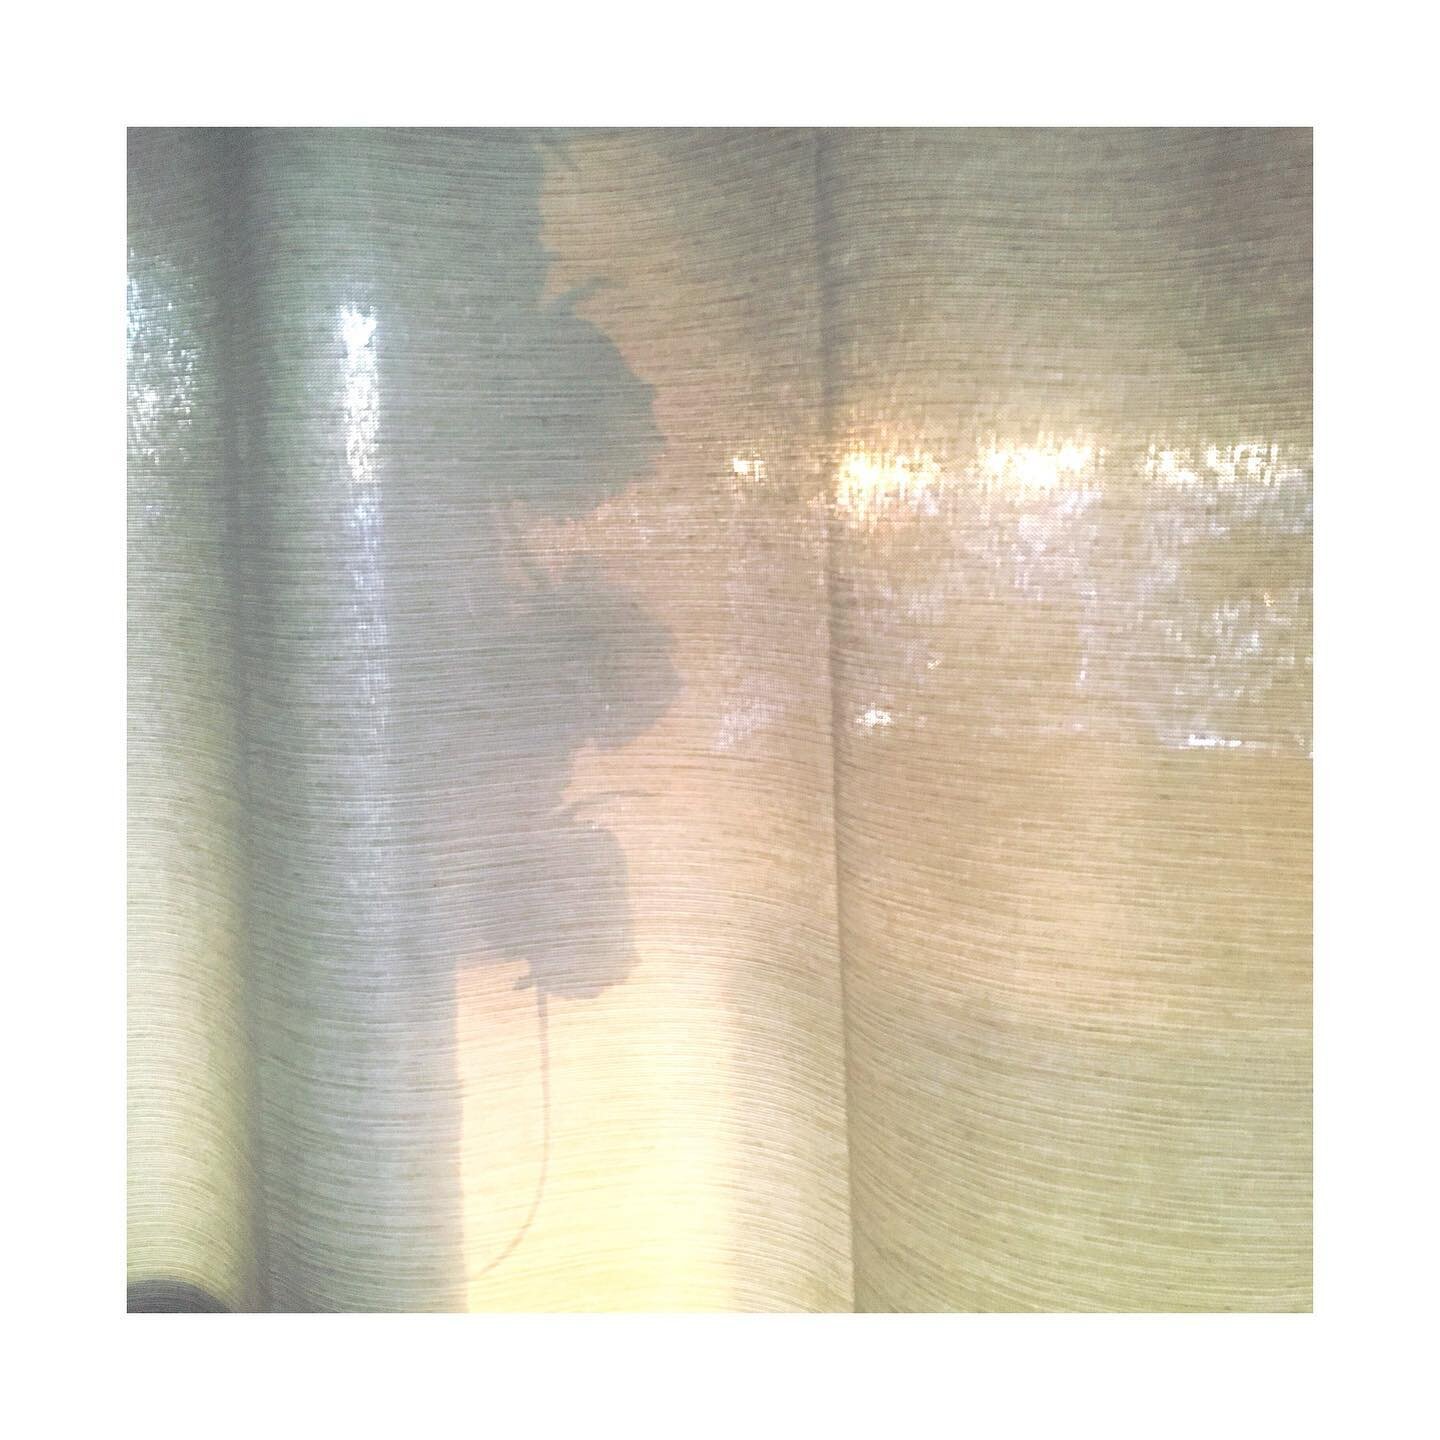 That magical way the sun shines into our sunroom every morning, dancing  through the semi sheer linens and into my studio. 

Something small like this always seems to spark something much bigger - a feeling of gratitude for each and every choice I&rs